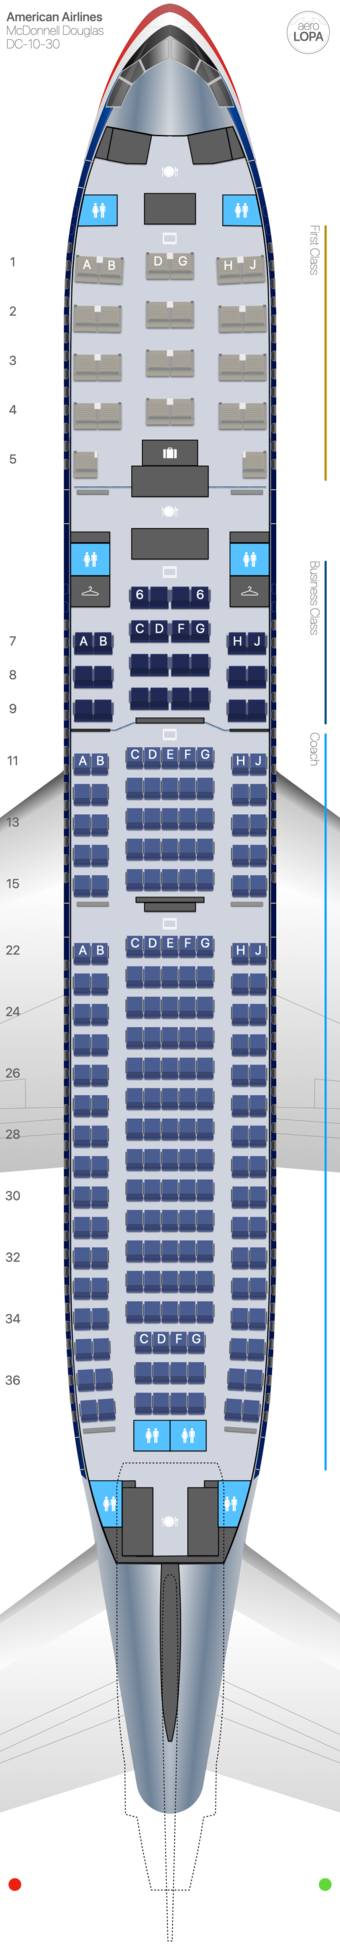 Crowd Source Let S Create The Best Aa Seating Plans Out There Page 9 Flyertalk Forums